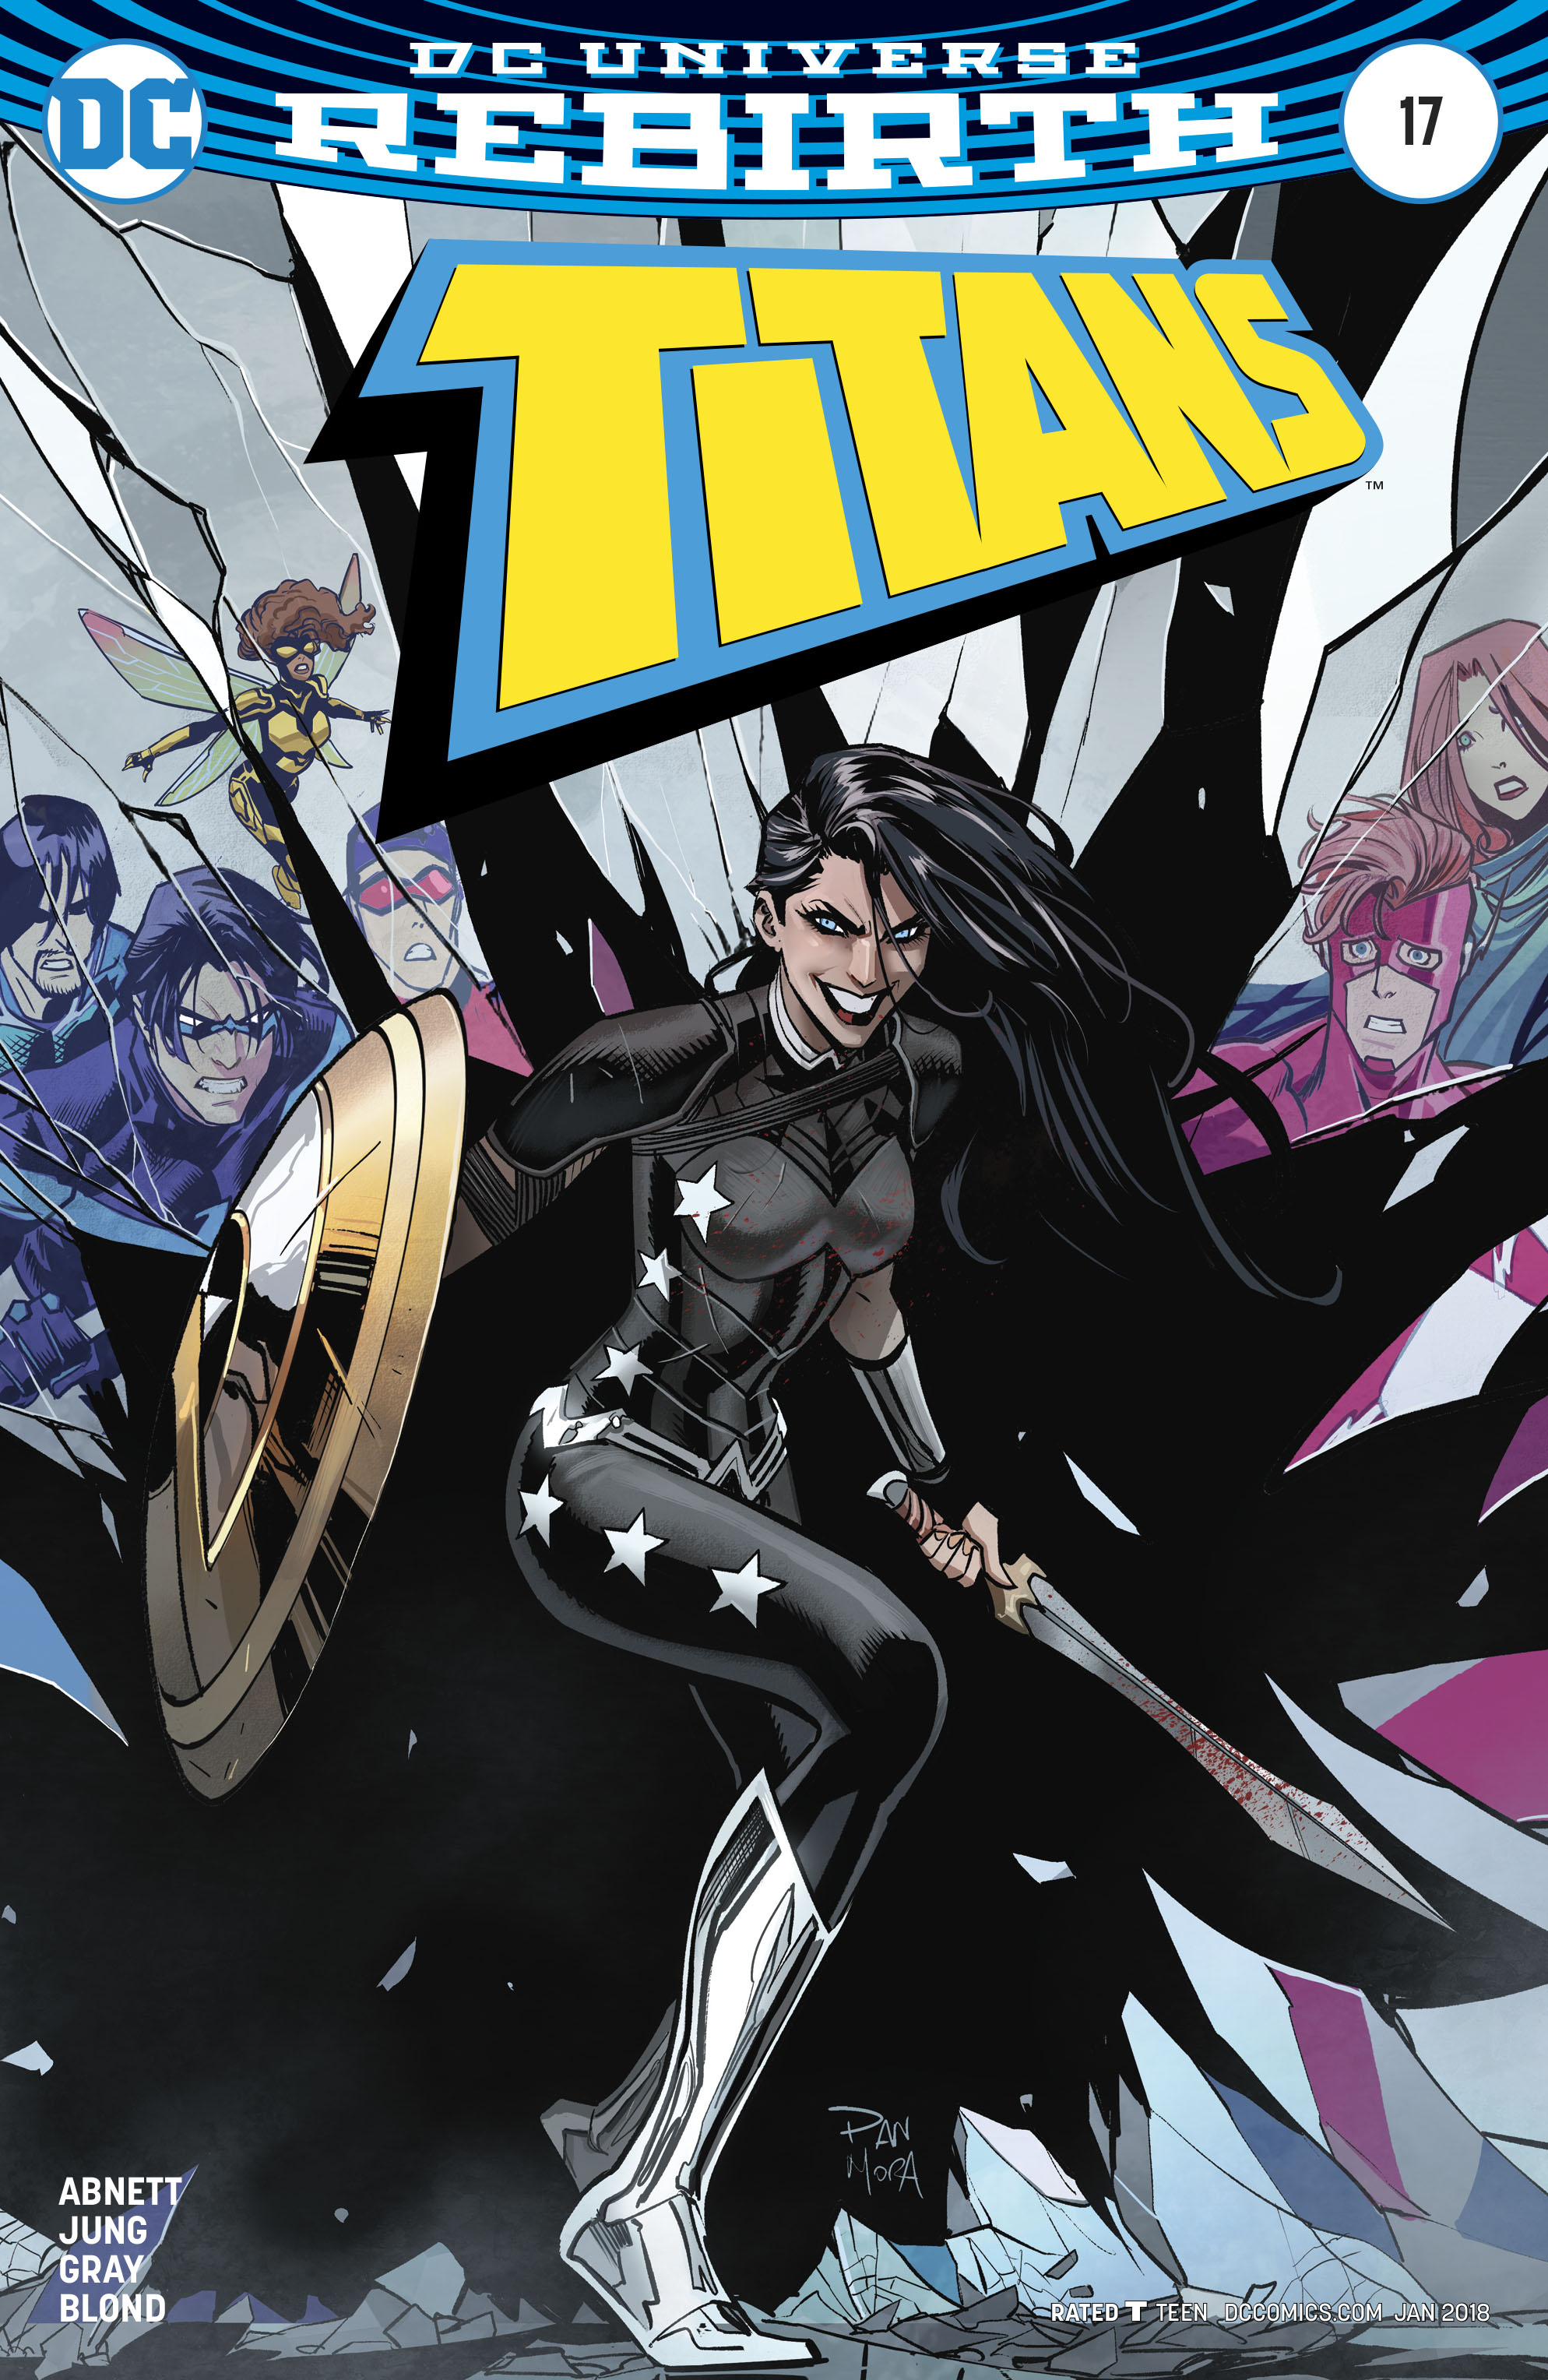 Titans (2016-): Chapter 17 - Page 2